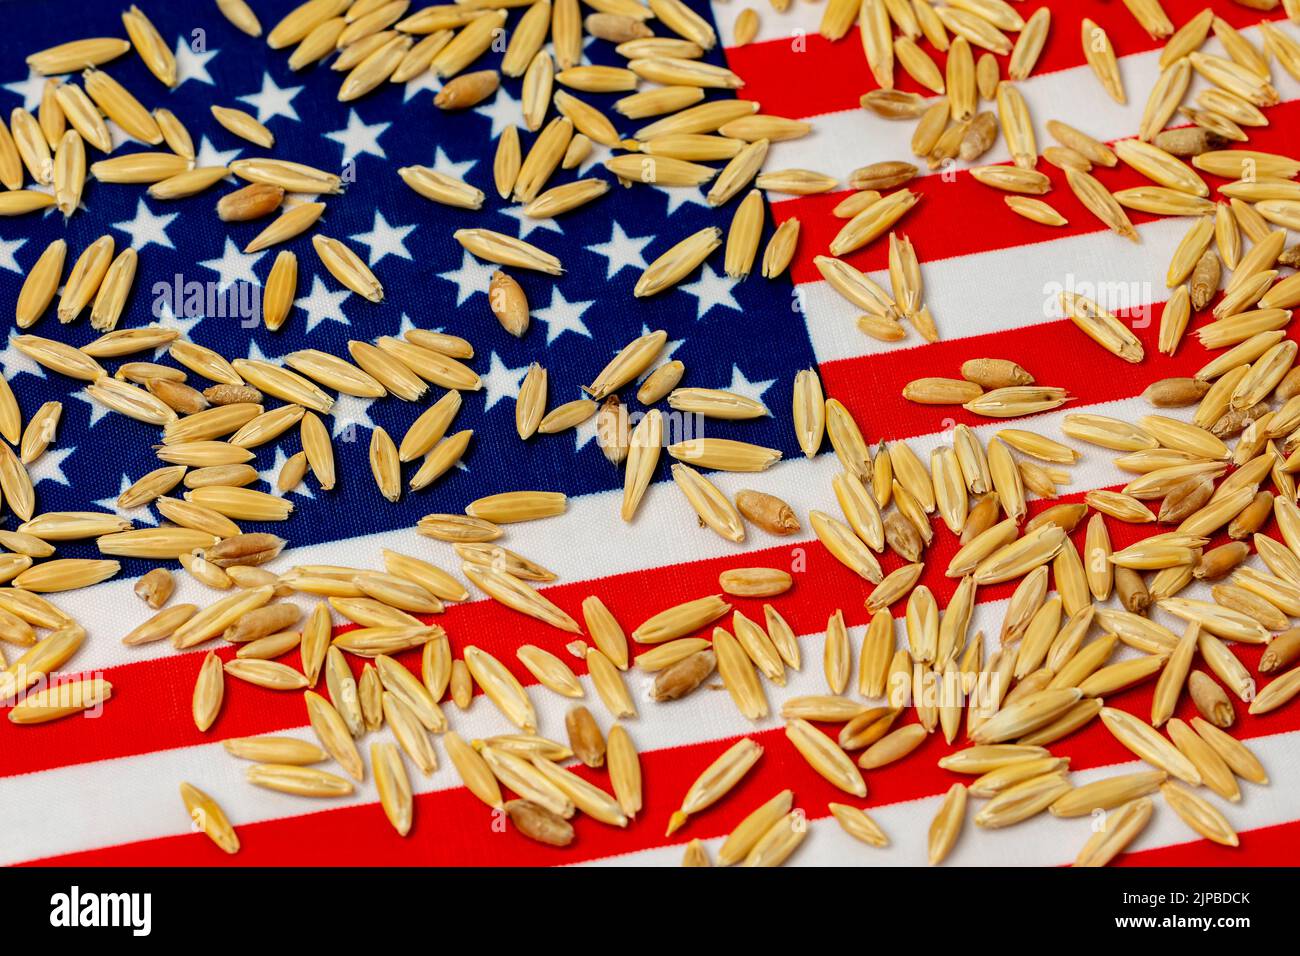 United States of America flag and oats. Oat farming, trade, and agriculture concept Stock Photo